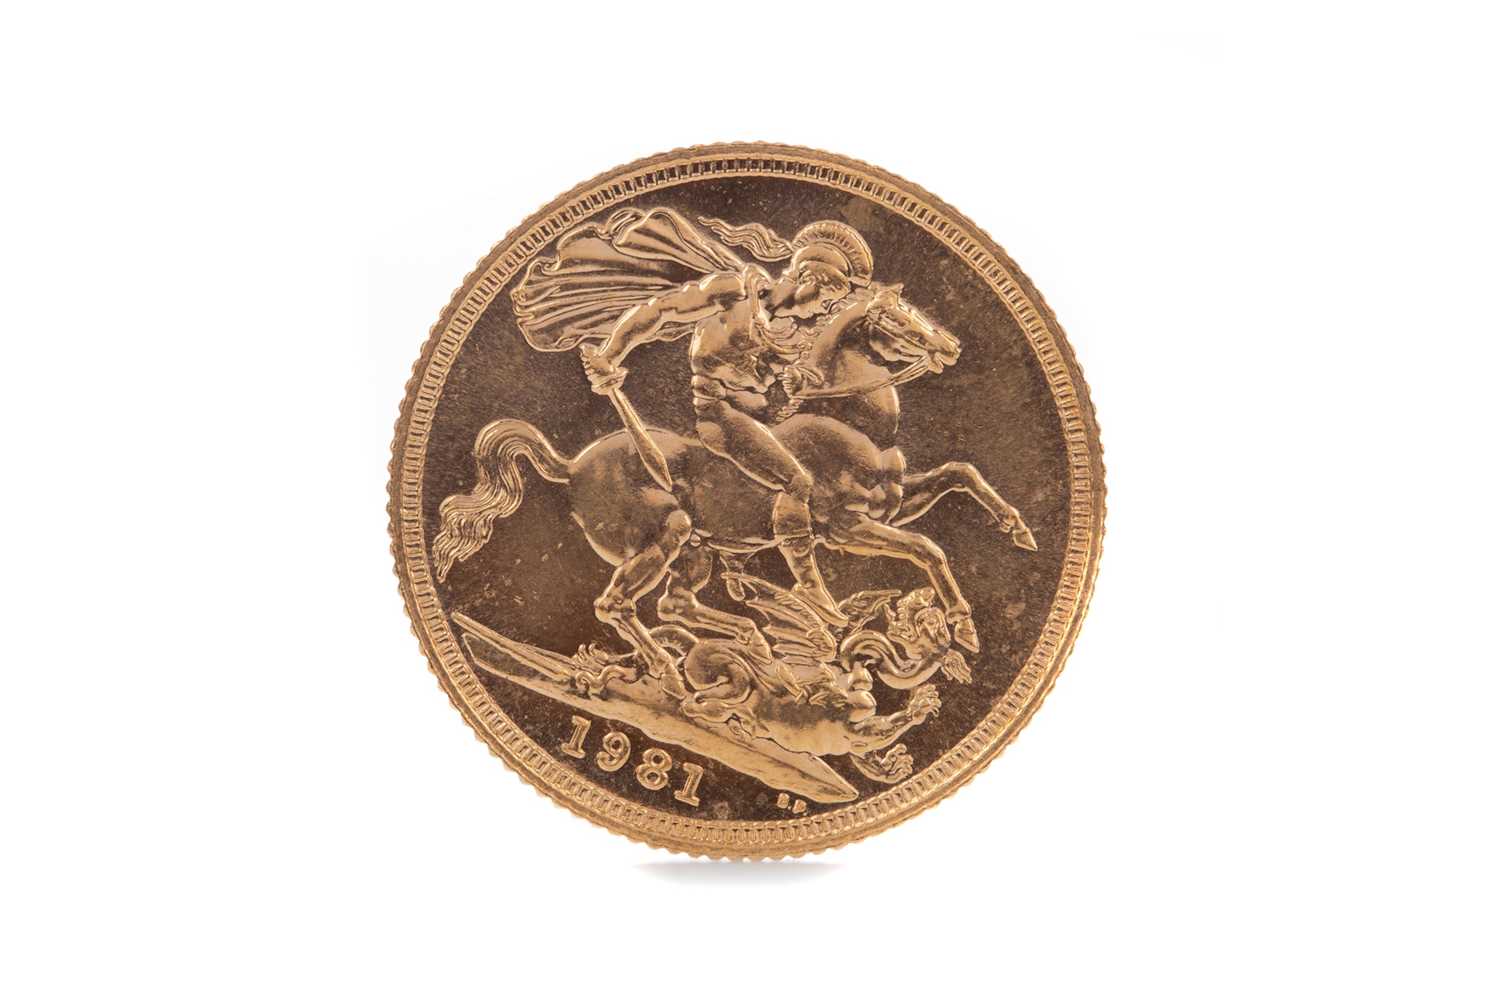 Lot 52 - AN ELIZABETH II GOLD SOVEREIGN DATED 1981